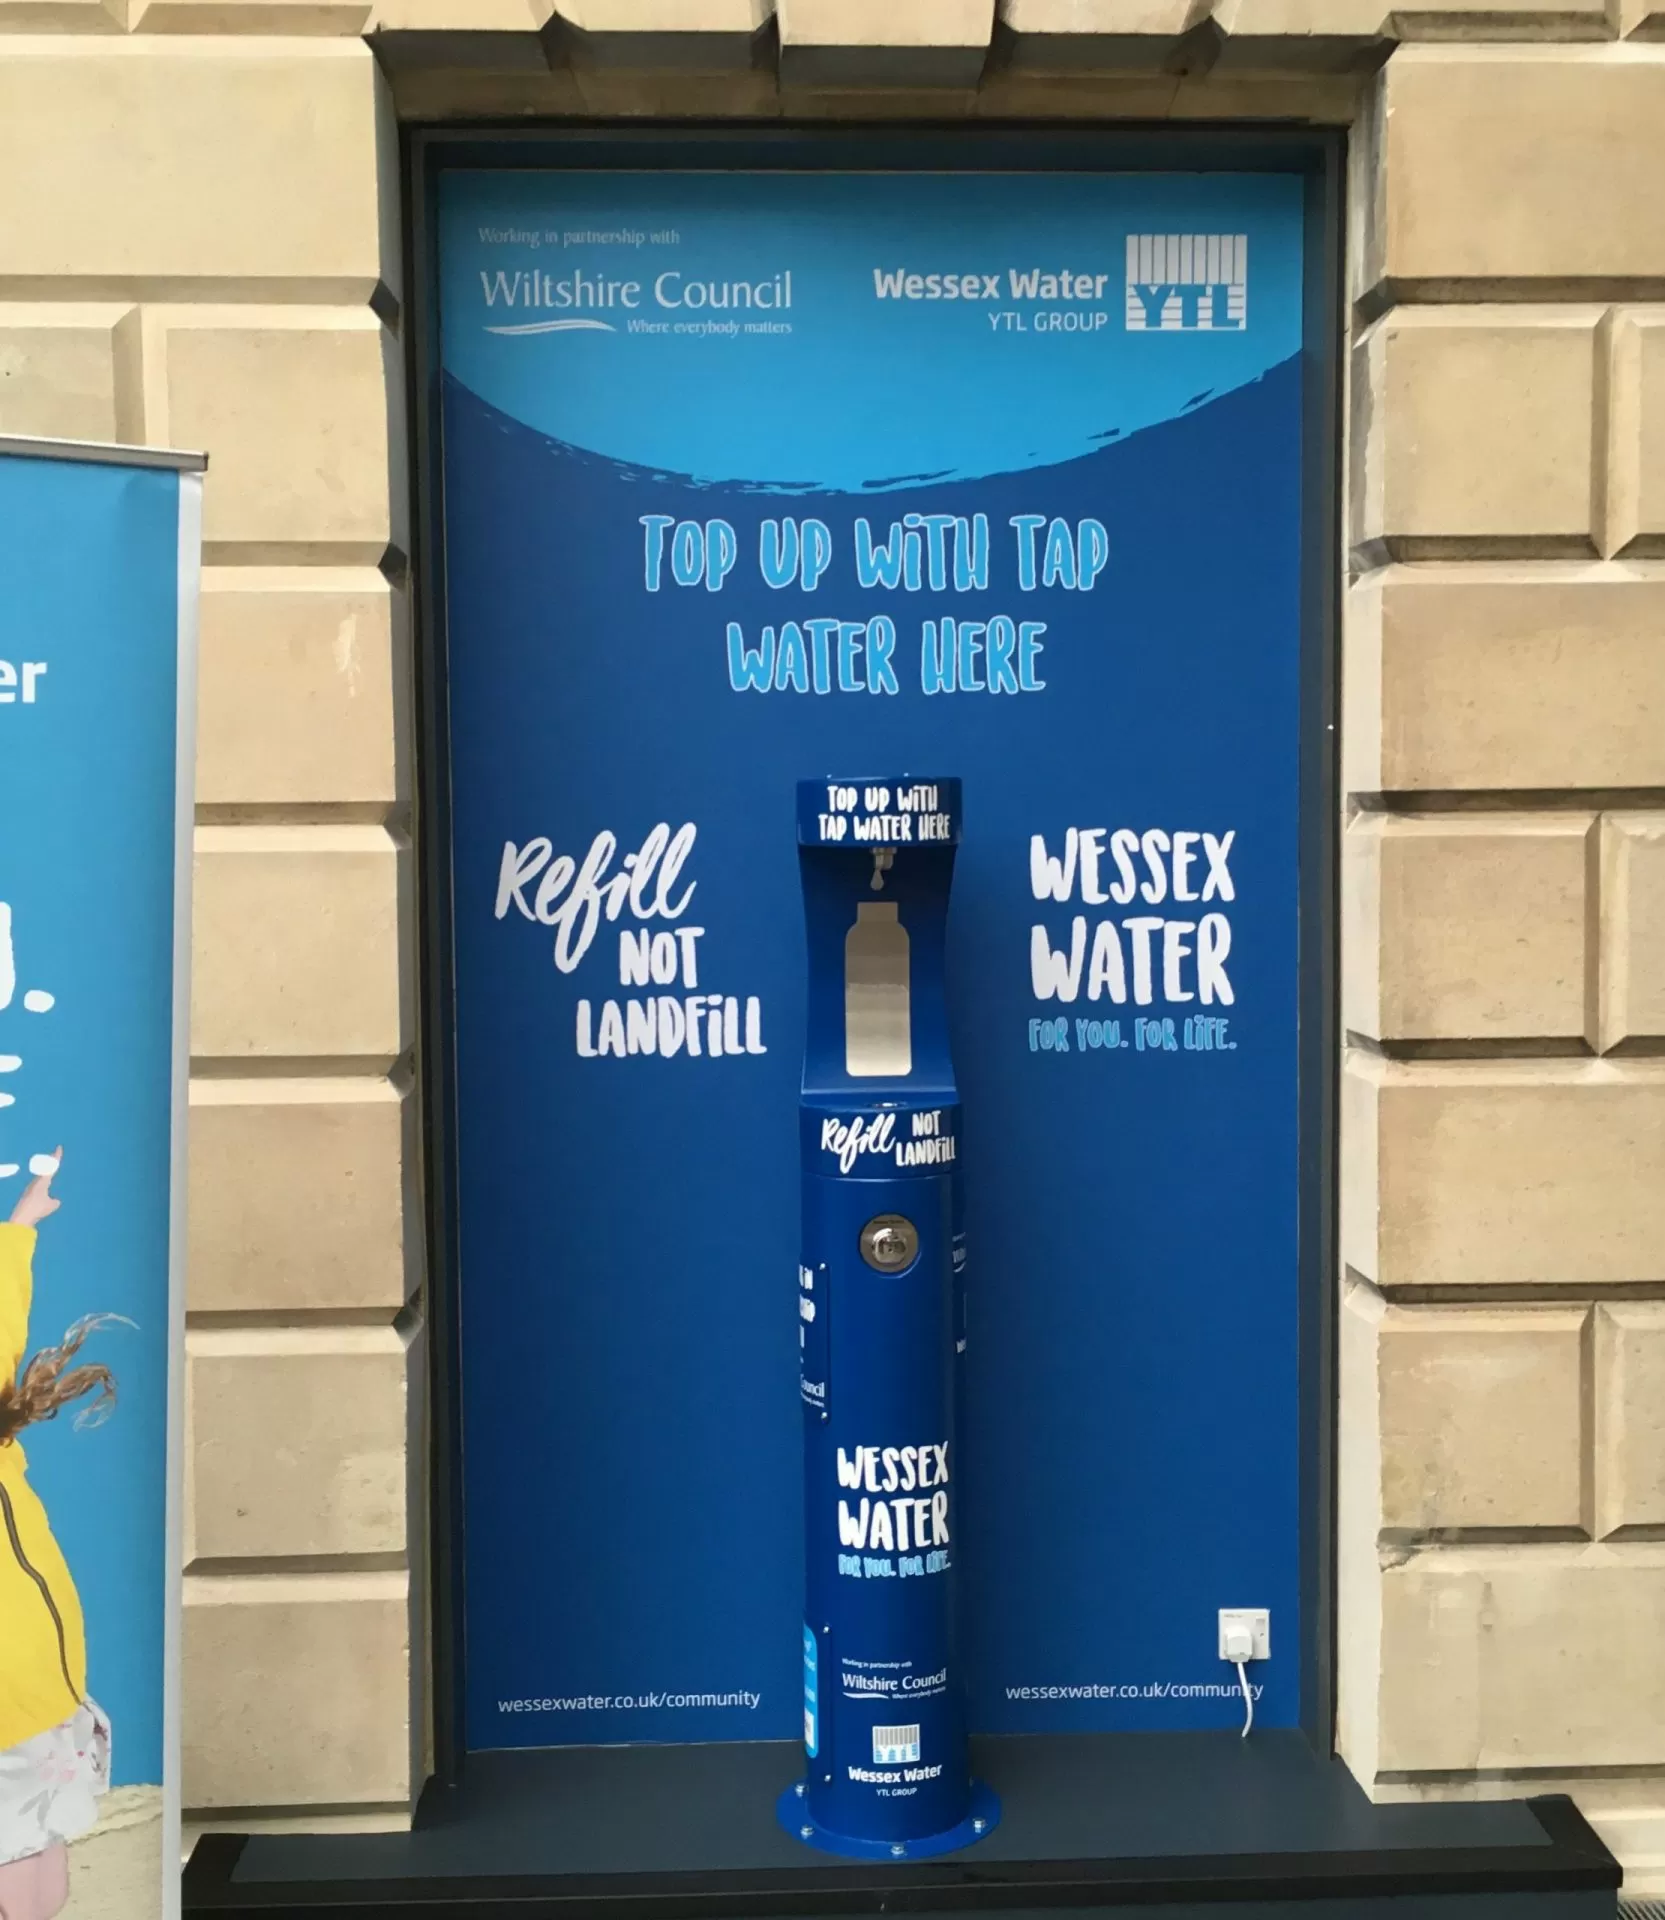 Newly installed Wessex Water and Wiltshire Council bottle refill station in County Hall